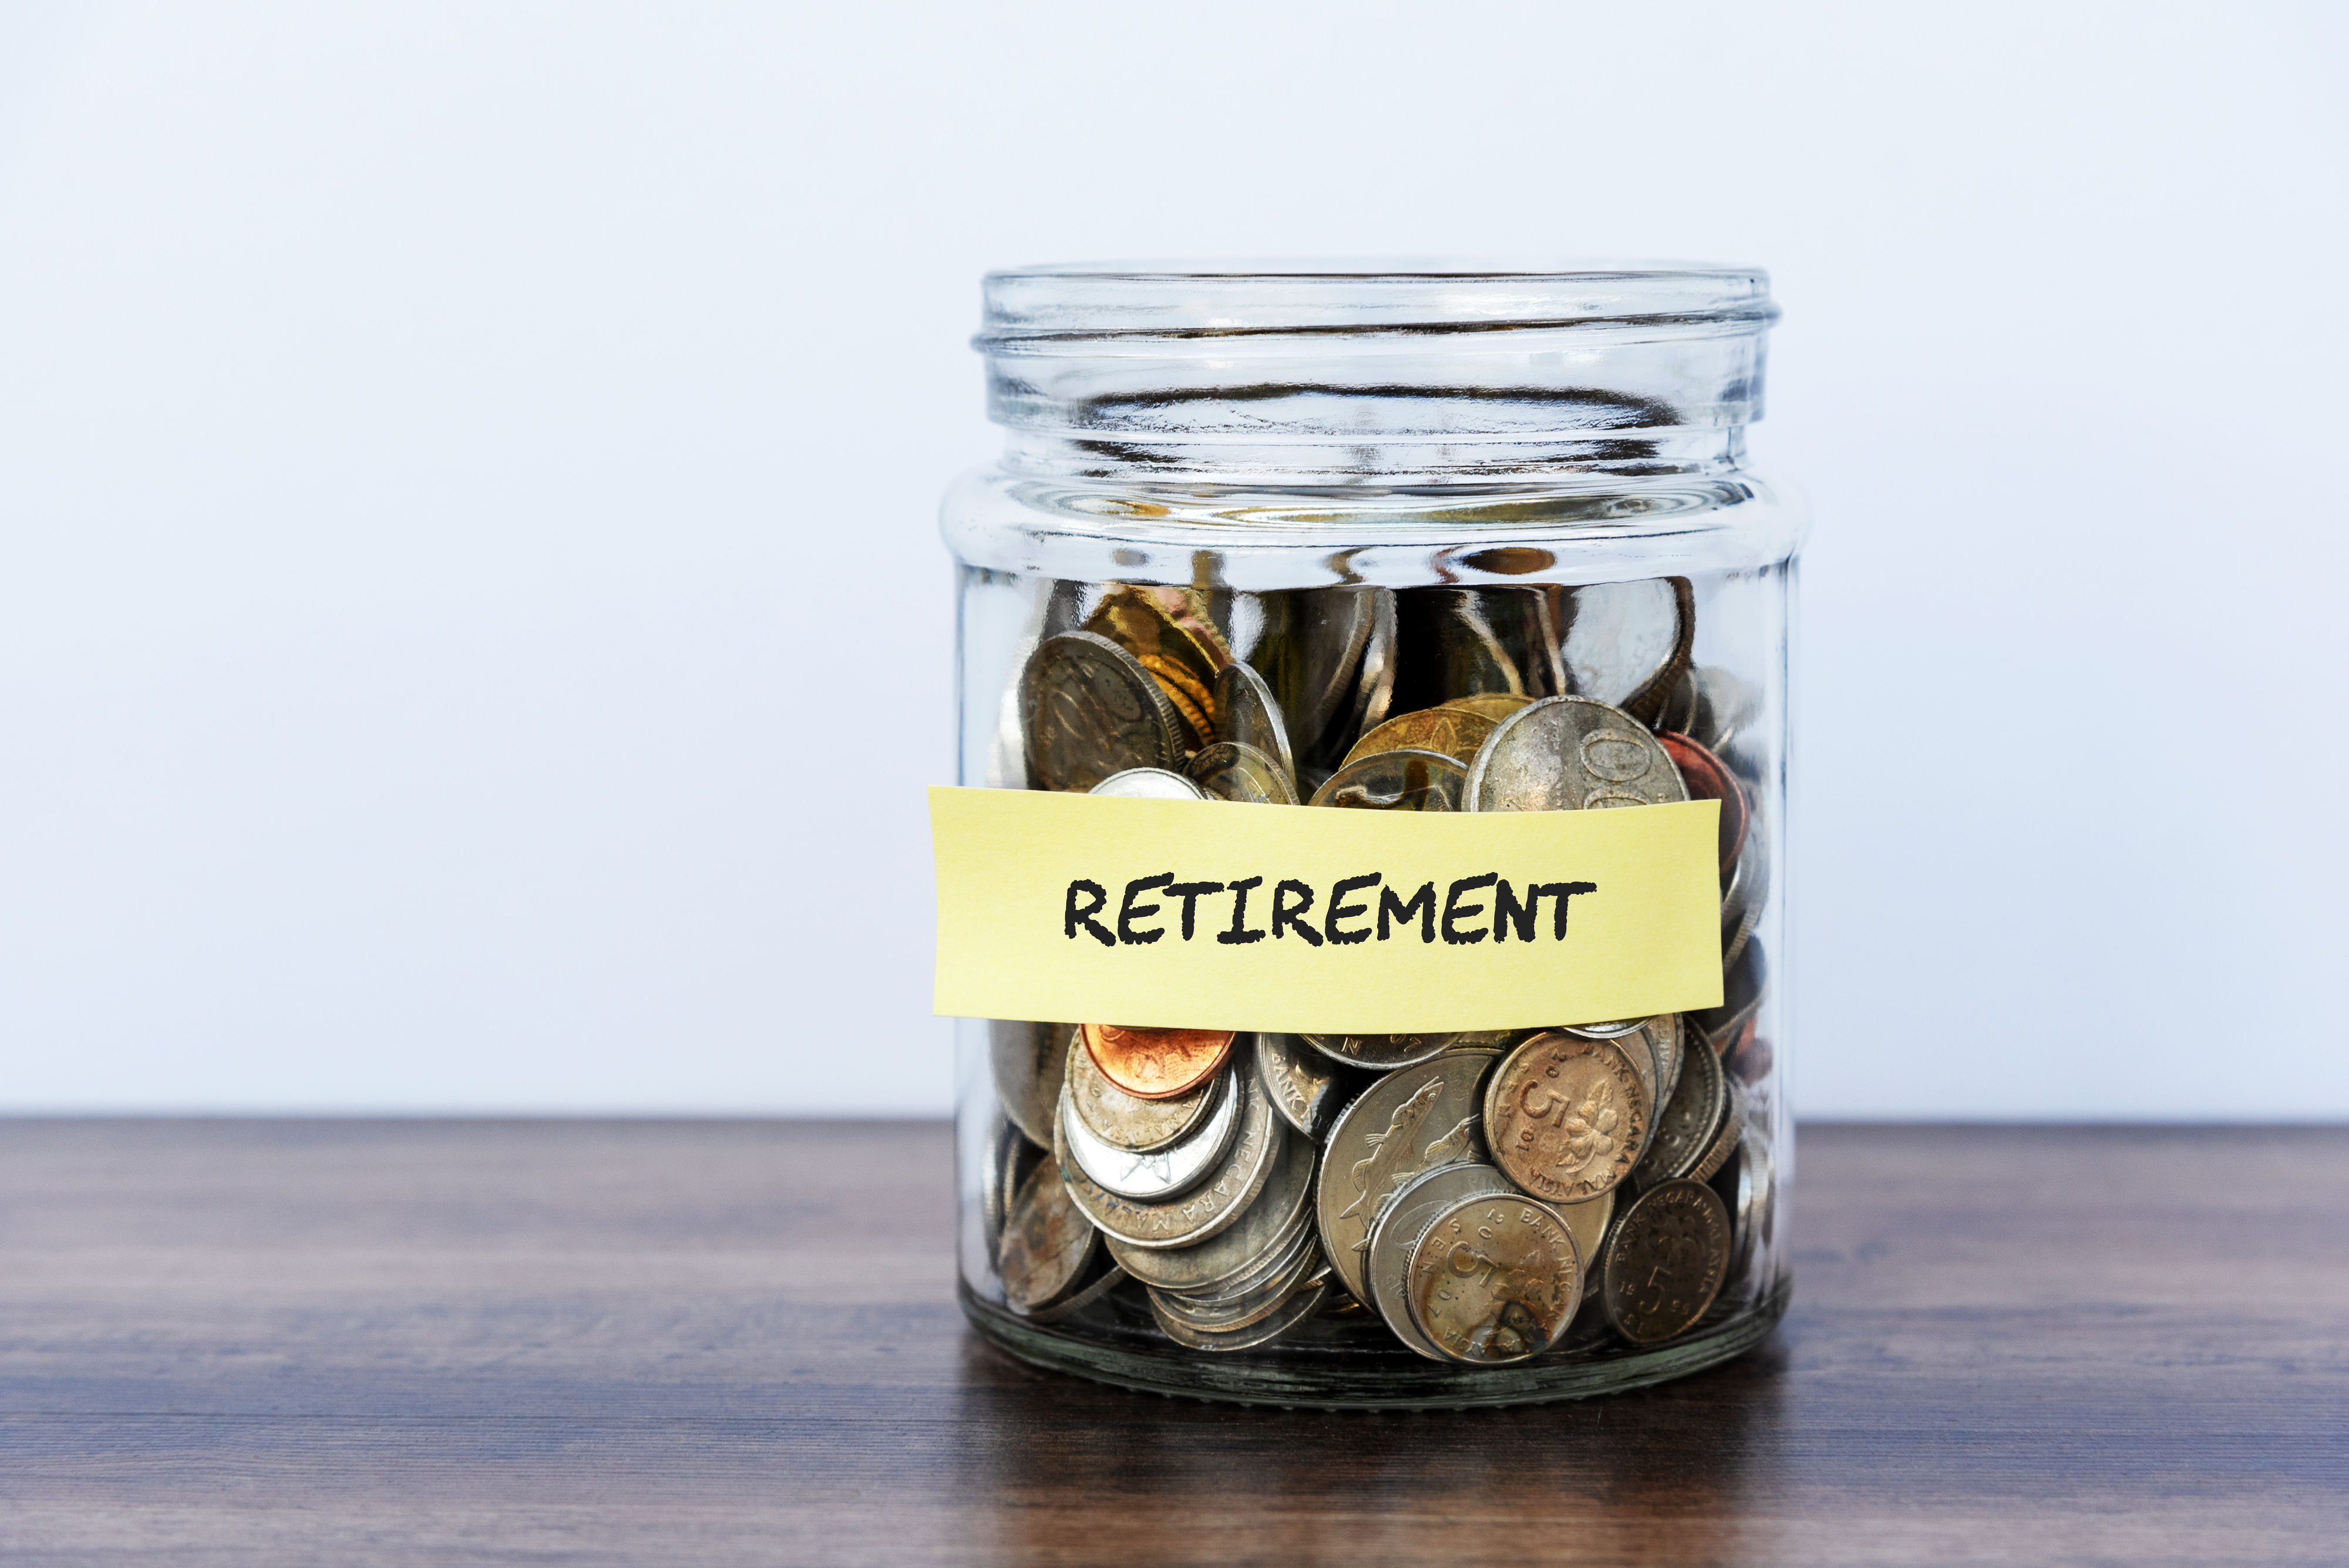 Glass jar filled with coins labeled &quot;RETIREMENT&quot; against a plain background